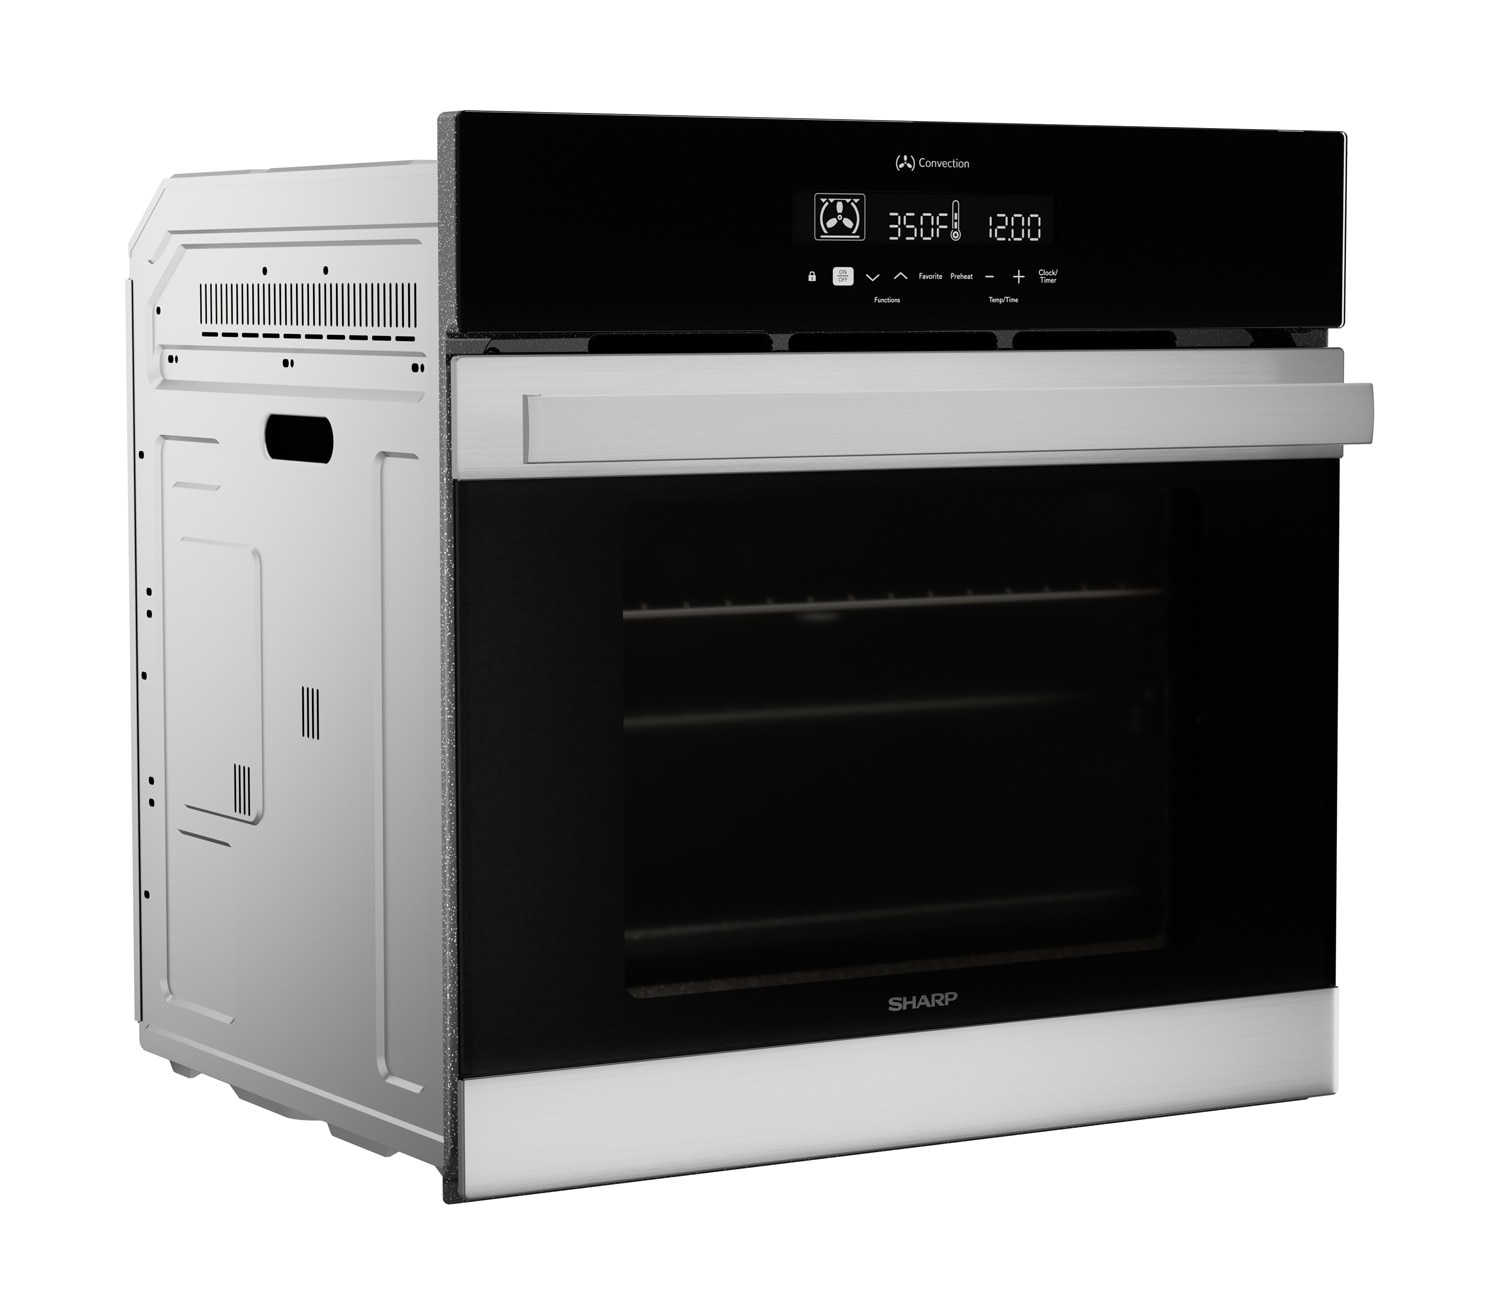 Best 24-inch wall oven